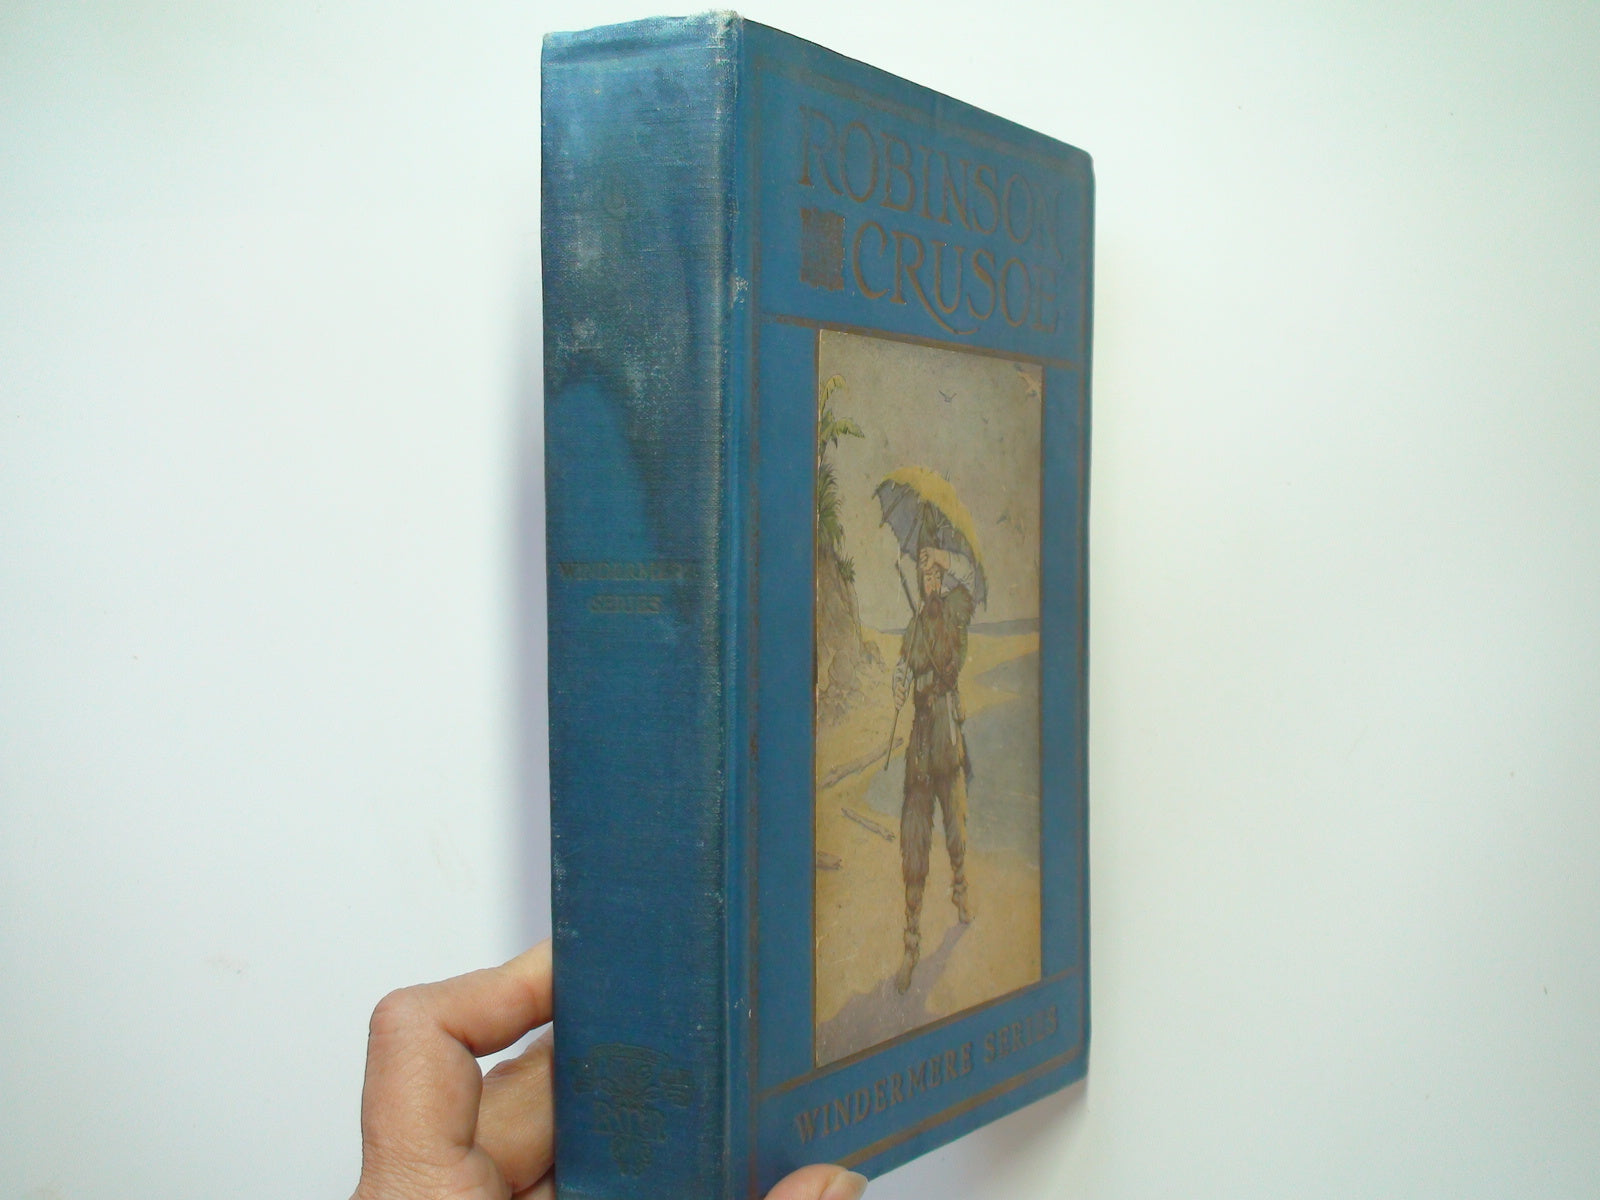 Life and Adventures of Robinson Crusoe by Daniel Defoe, Illustrated, 1916